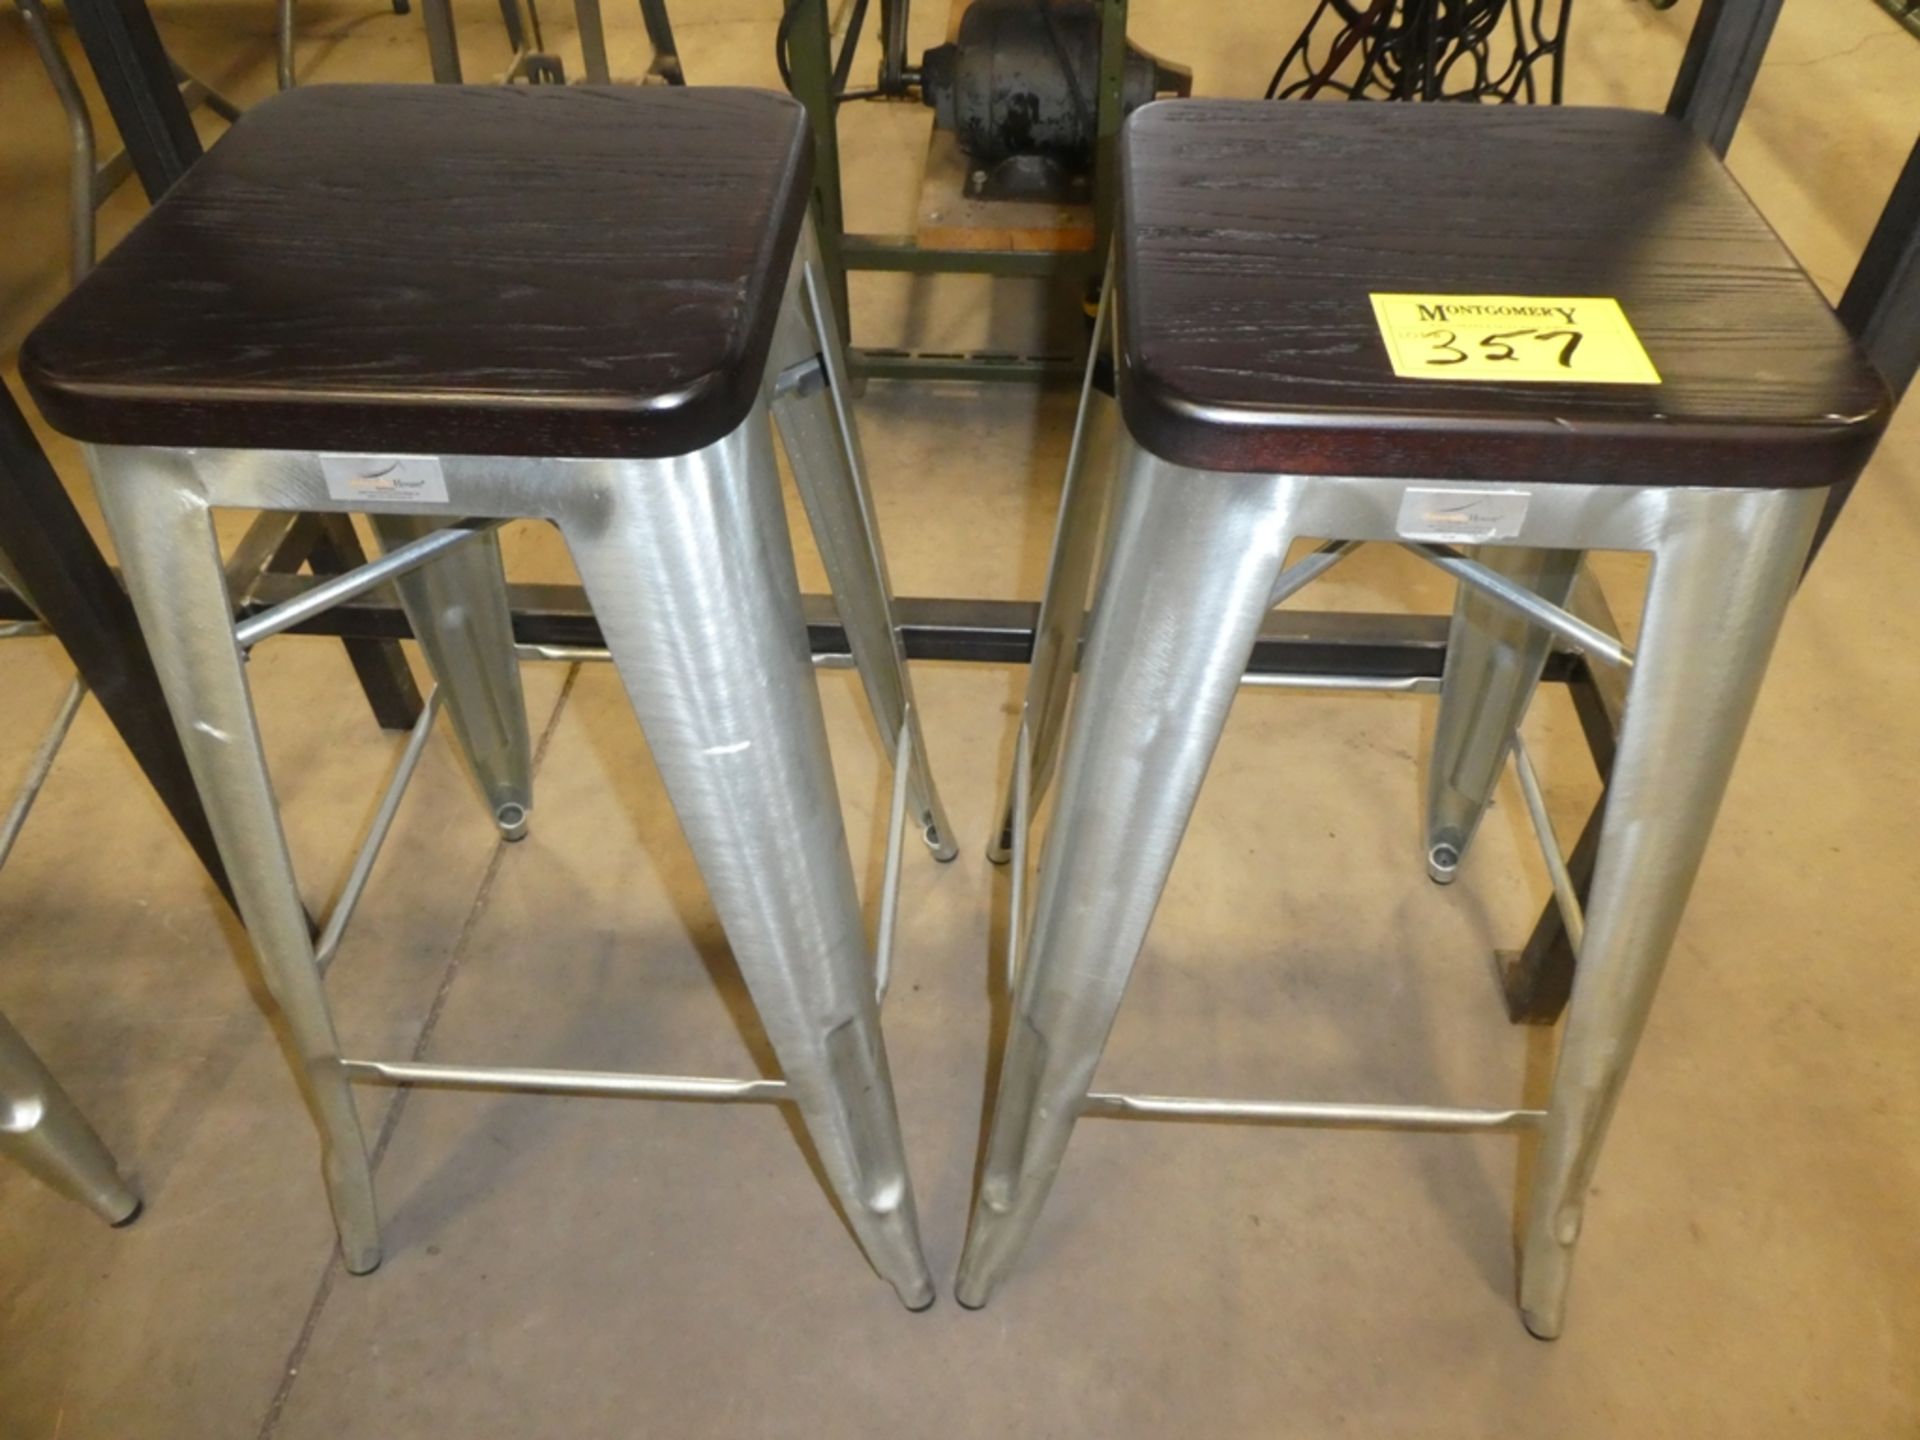 2-MOUNTAIN HOUSE STAINLESS STEEL BAR STOOLS